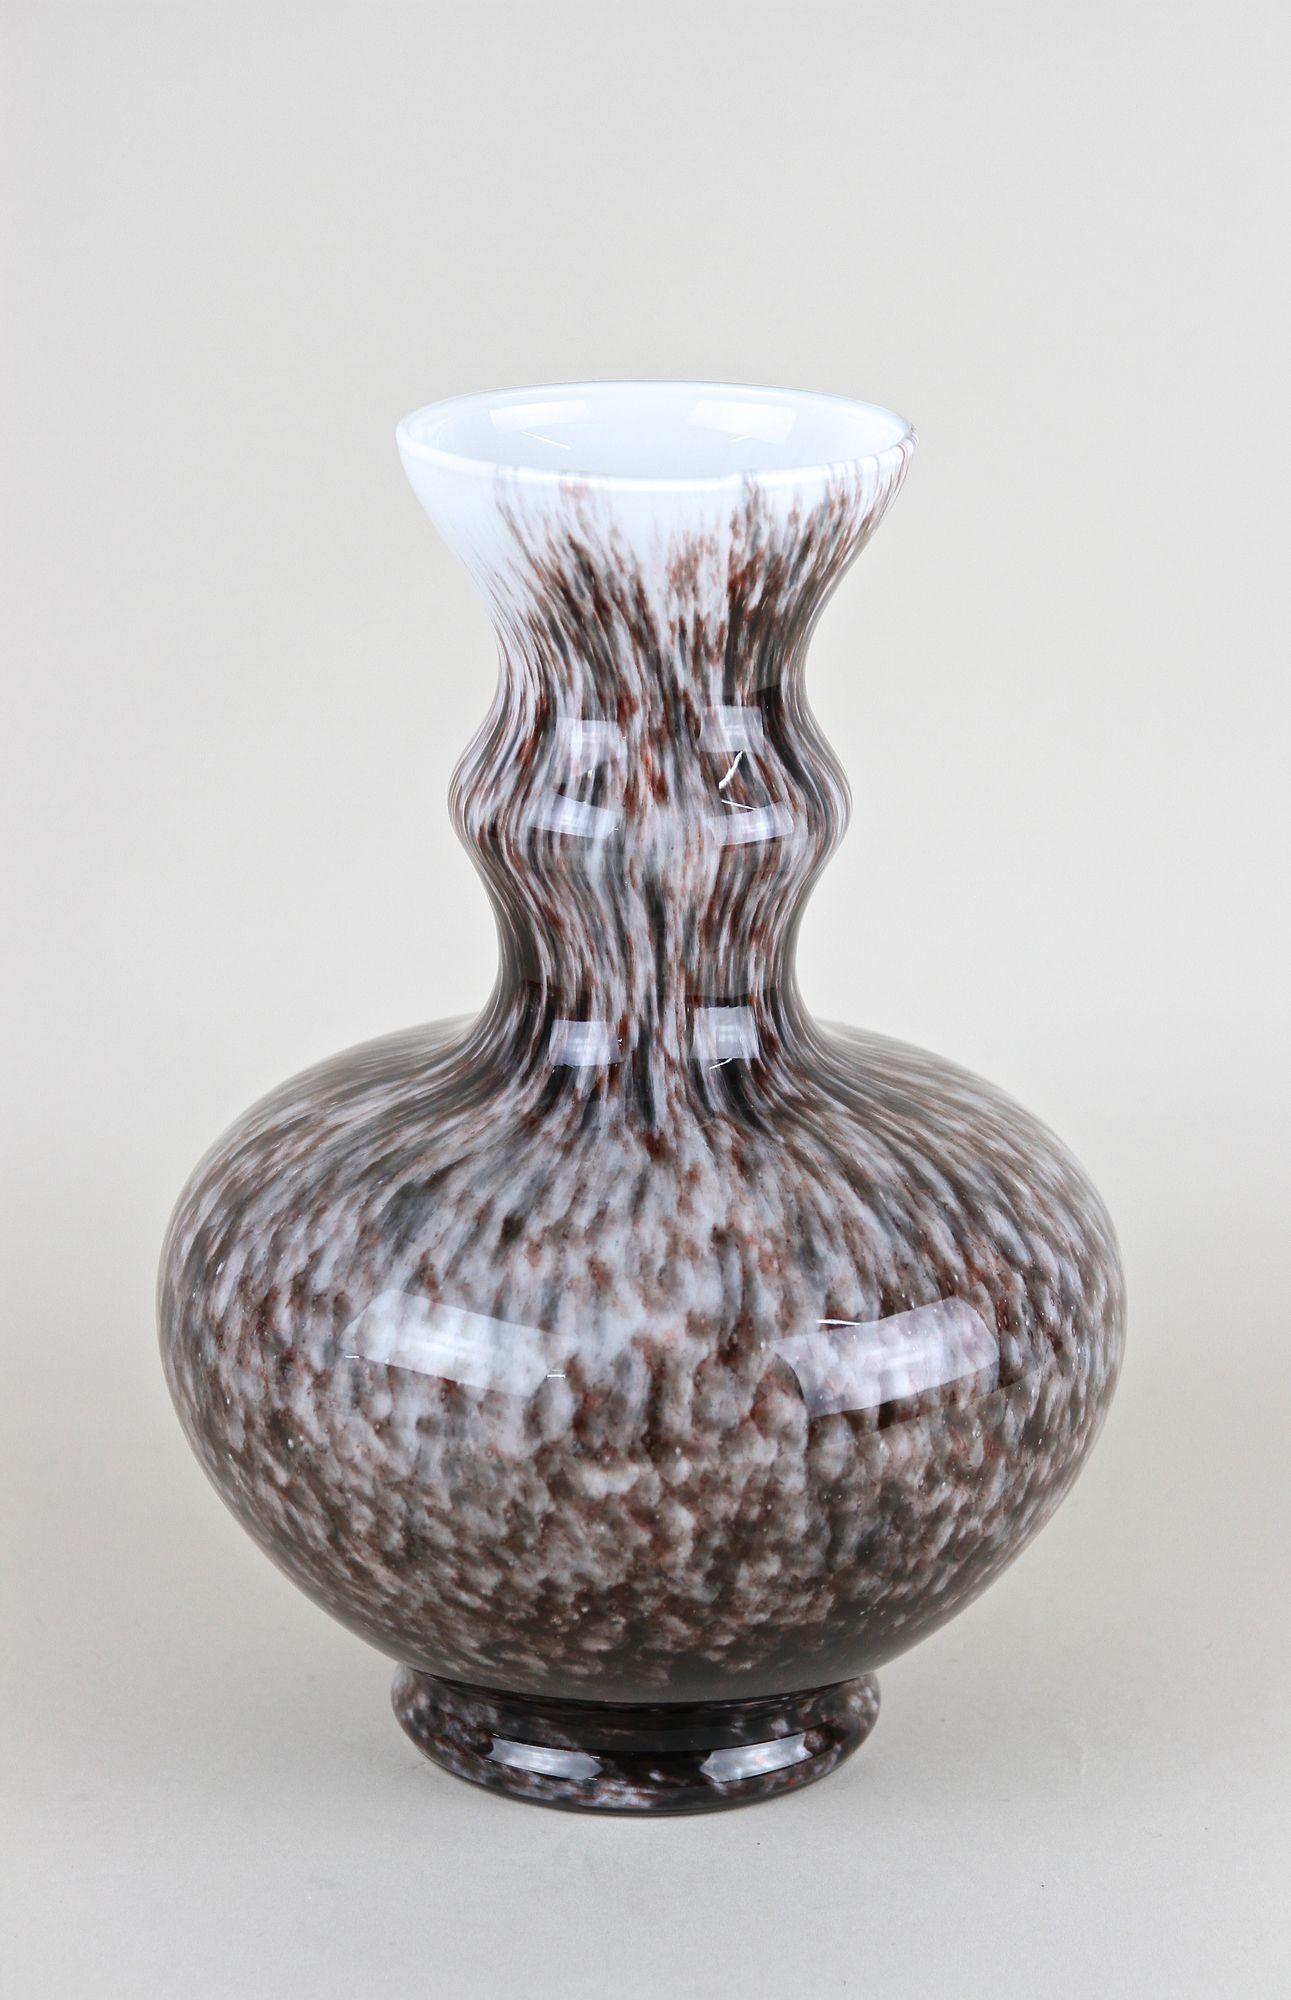 Contemporary 20th century glass vase coming from the famous workshops of the little island called Murano in Venice/ Italy. Artfully crafted in the early 1970s, this incredible piece of Italian glass art impresses with a beautiful shaped bulbous body